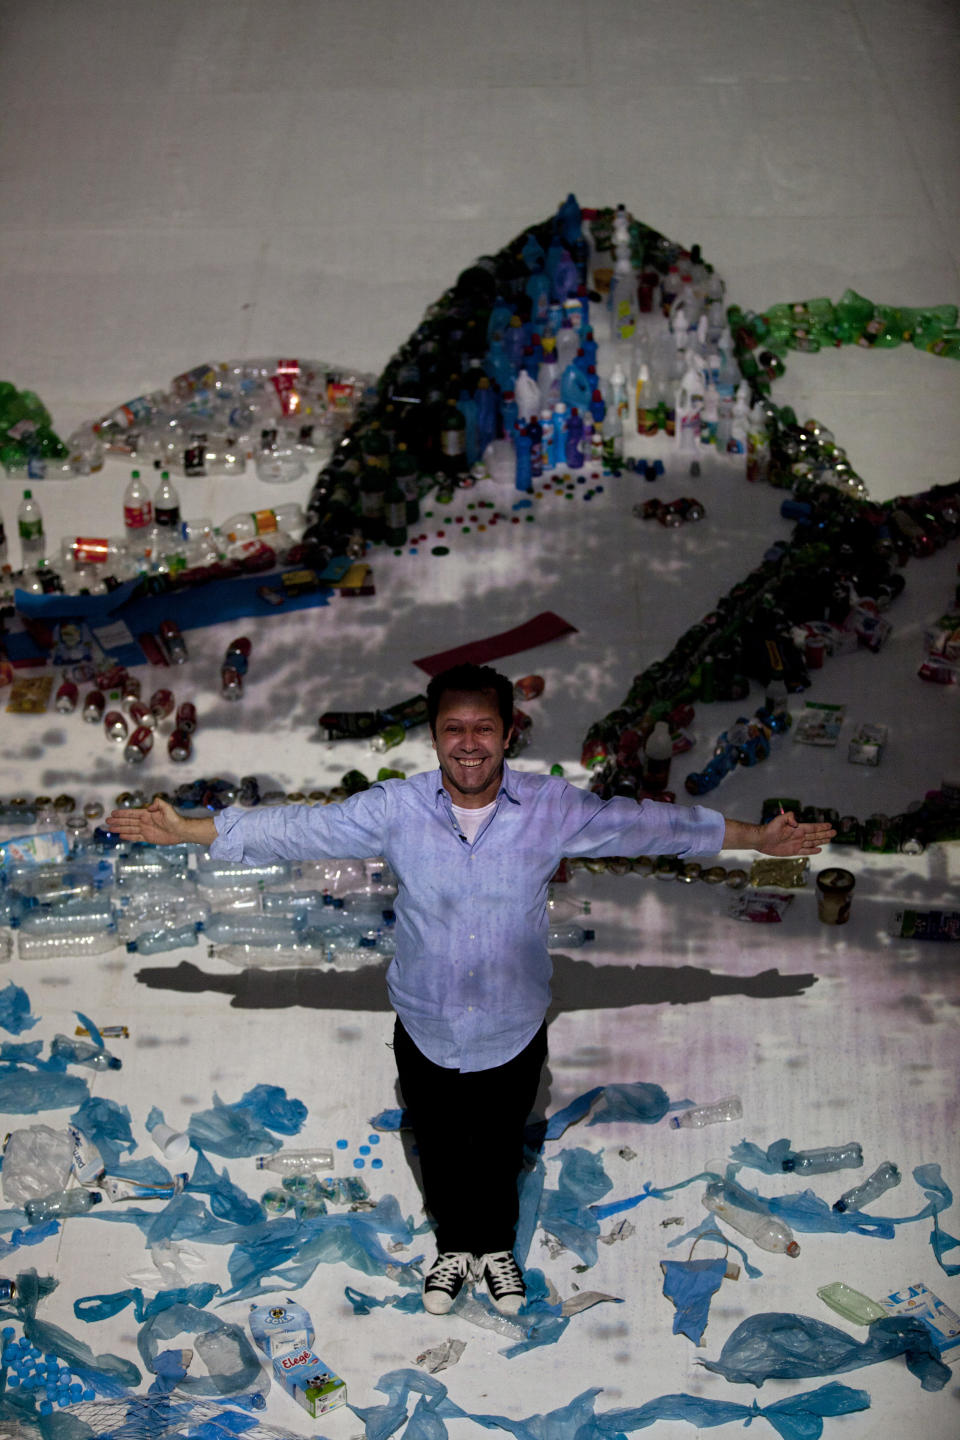 Brazilian artist Vik Muniz poses for a photo as he stands in his "Landscape" project that uses waste to recreate the image of Guanabara Bay in Rio de Janeiro, Brazil, Saturday, June 16, 2012. Muniz's project recreates city landmarks with recyclable materials donated by the public, who will be able to take their waste to the installation's tent between June 15 and 22, on the sidelines of the UN Conference on Sustainable Development, or Rio+20. (AP Photo/Silvia Izquierdo)